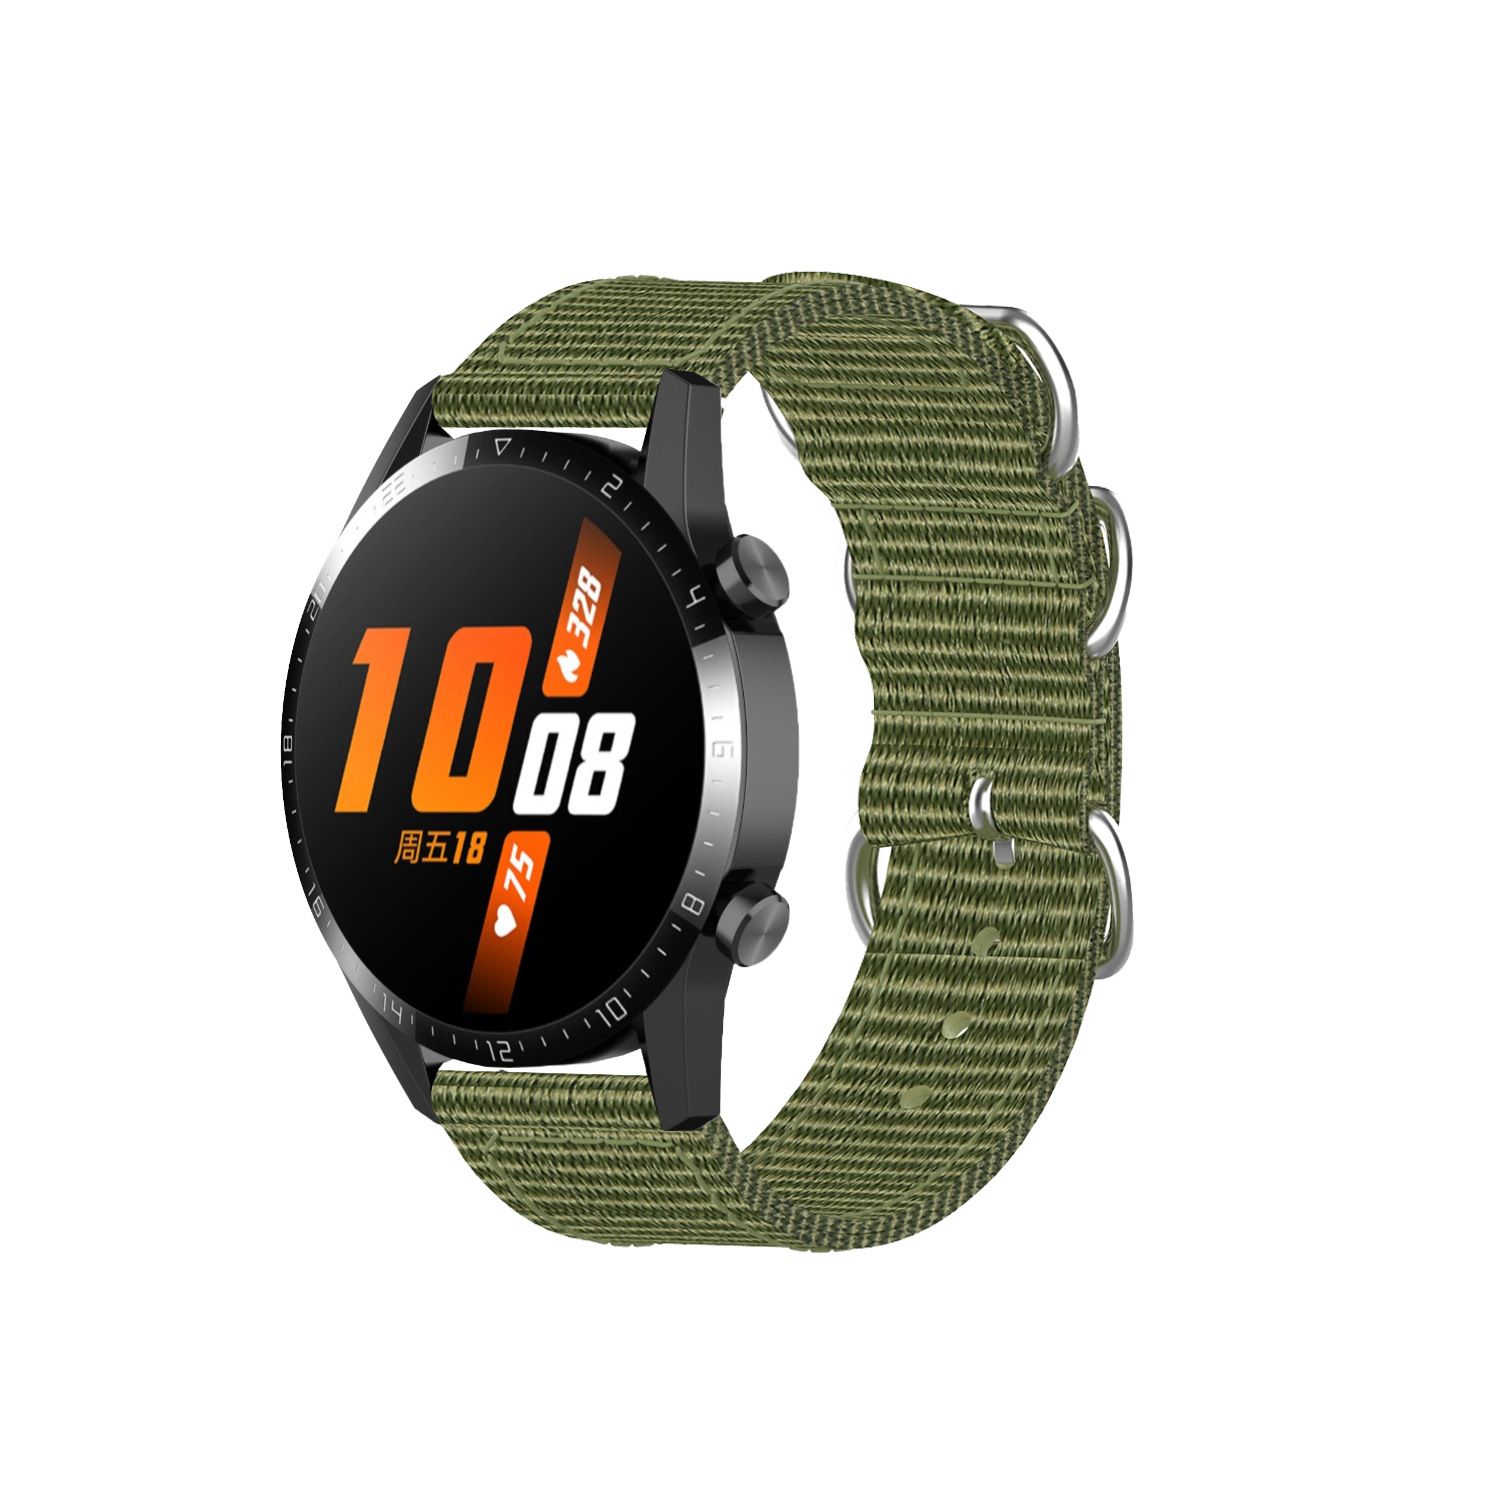 Bakeey-2022mm-Width-Breathable-Sweatproof-Nylon-Canvas-Watch-Band-Strap-Replacement-for-Huawei-Watch-1926643-21